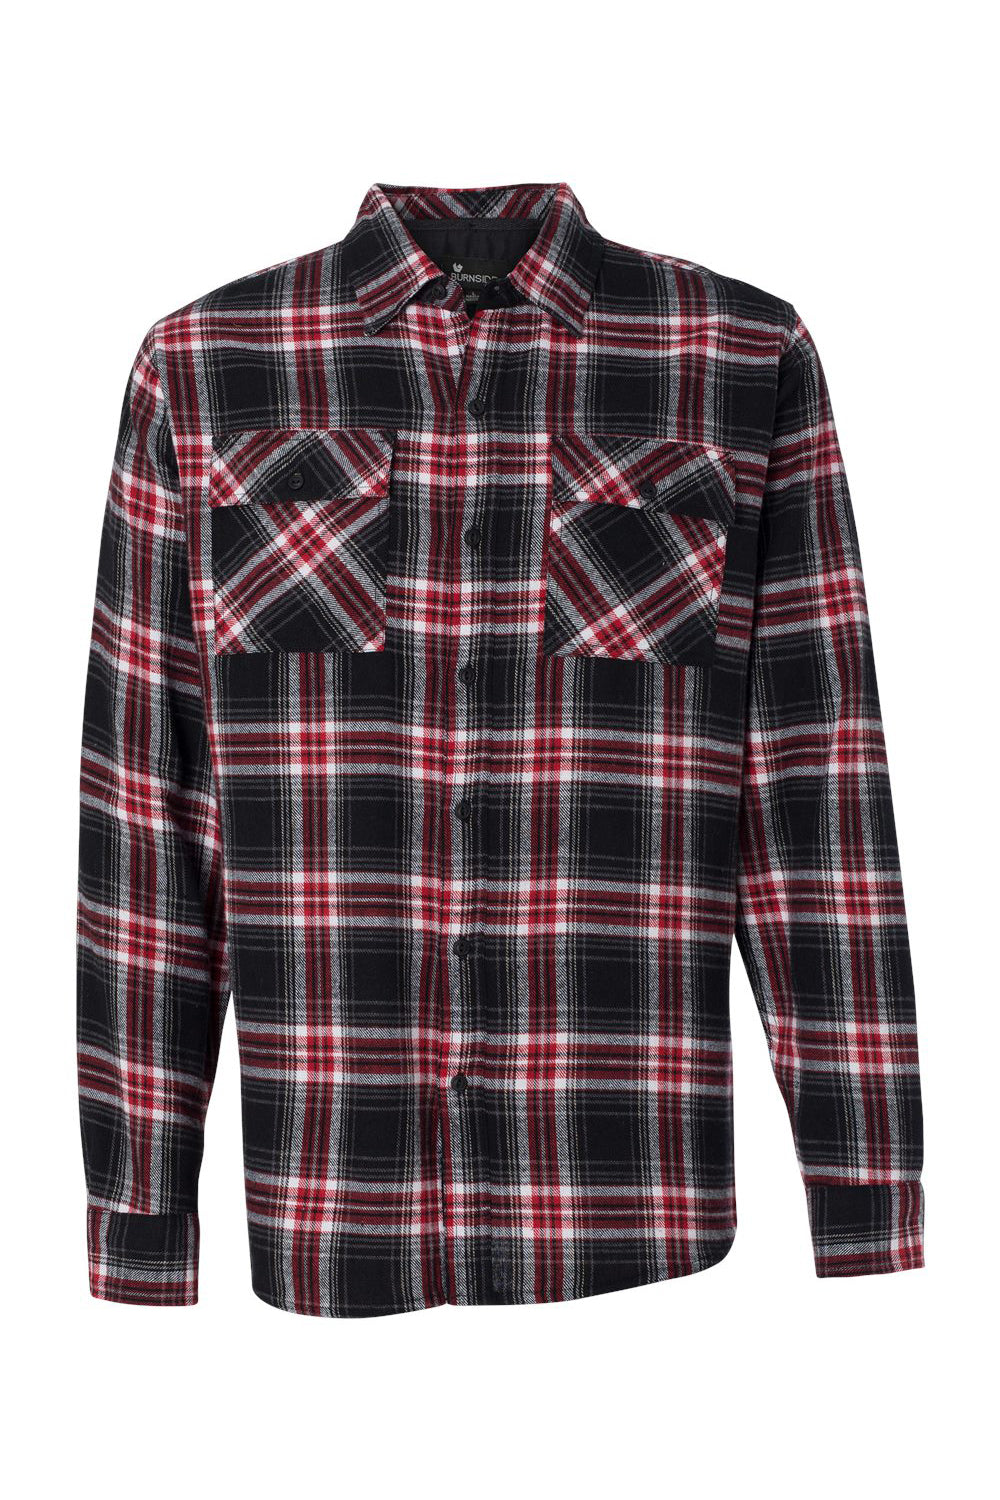 Burnside B8210/8210 Mens Flannel Long Sleeve Button Down Shirt w/ Double Pockets Red Flat Front